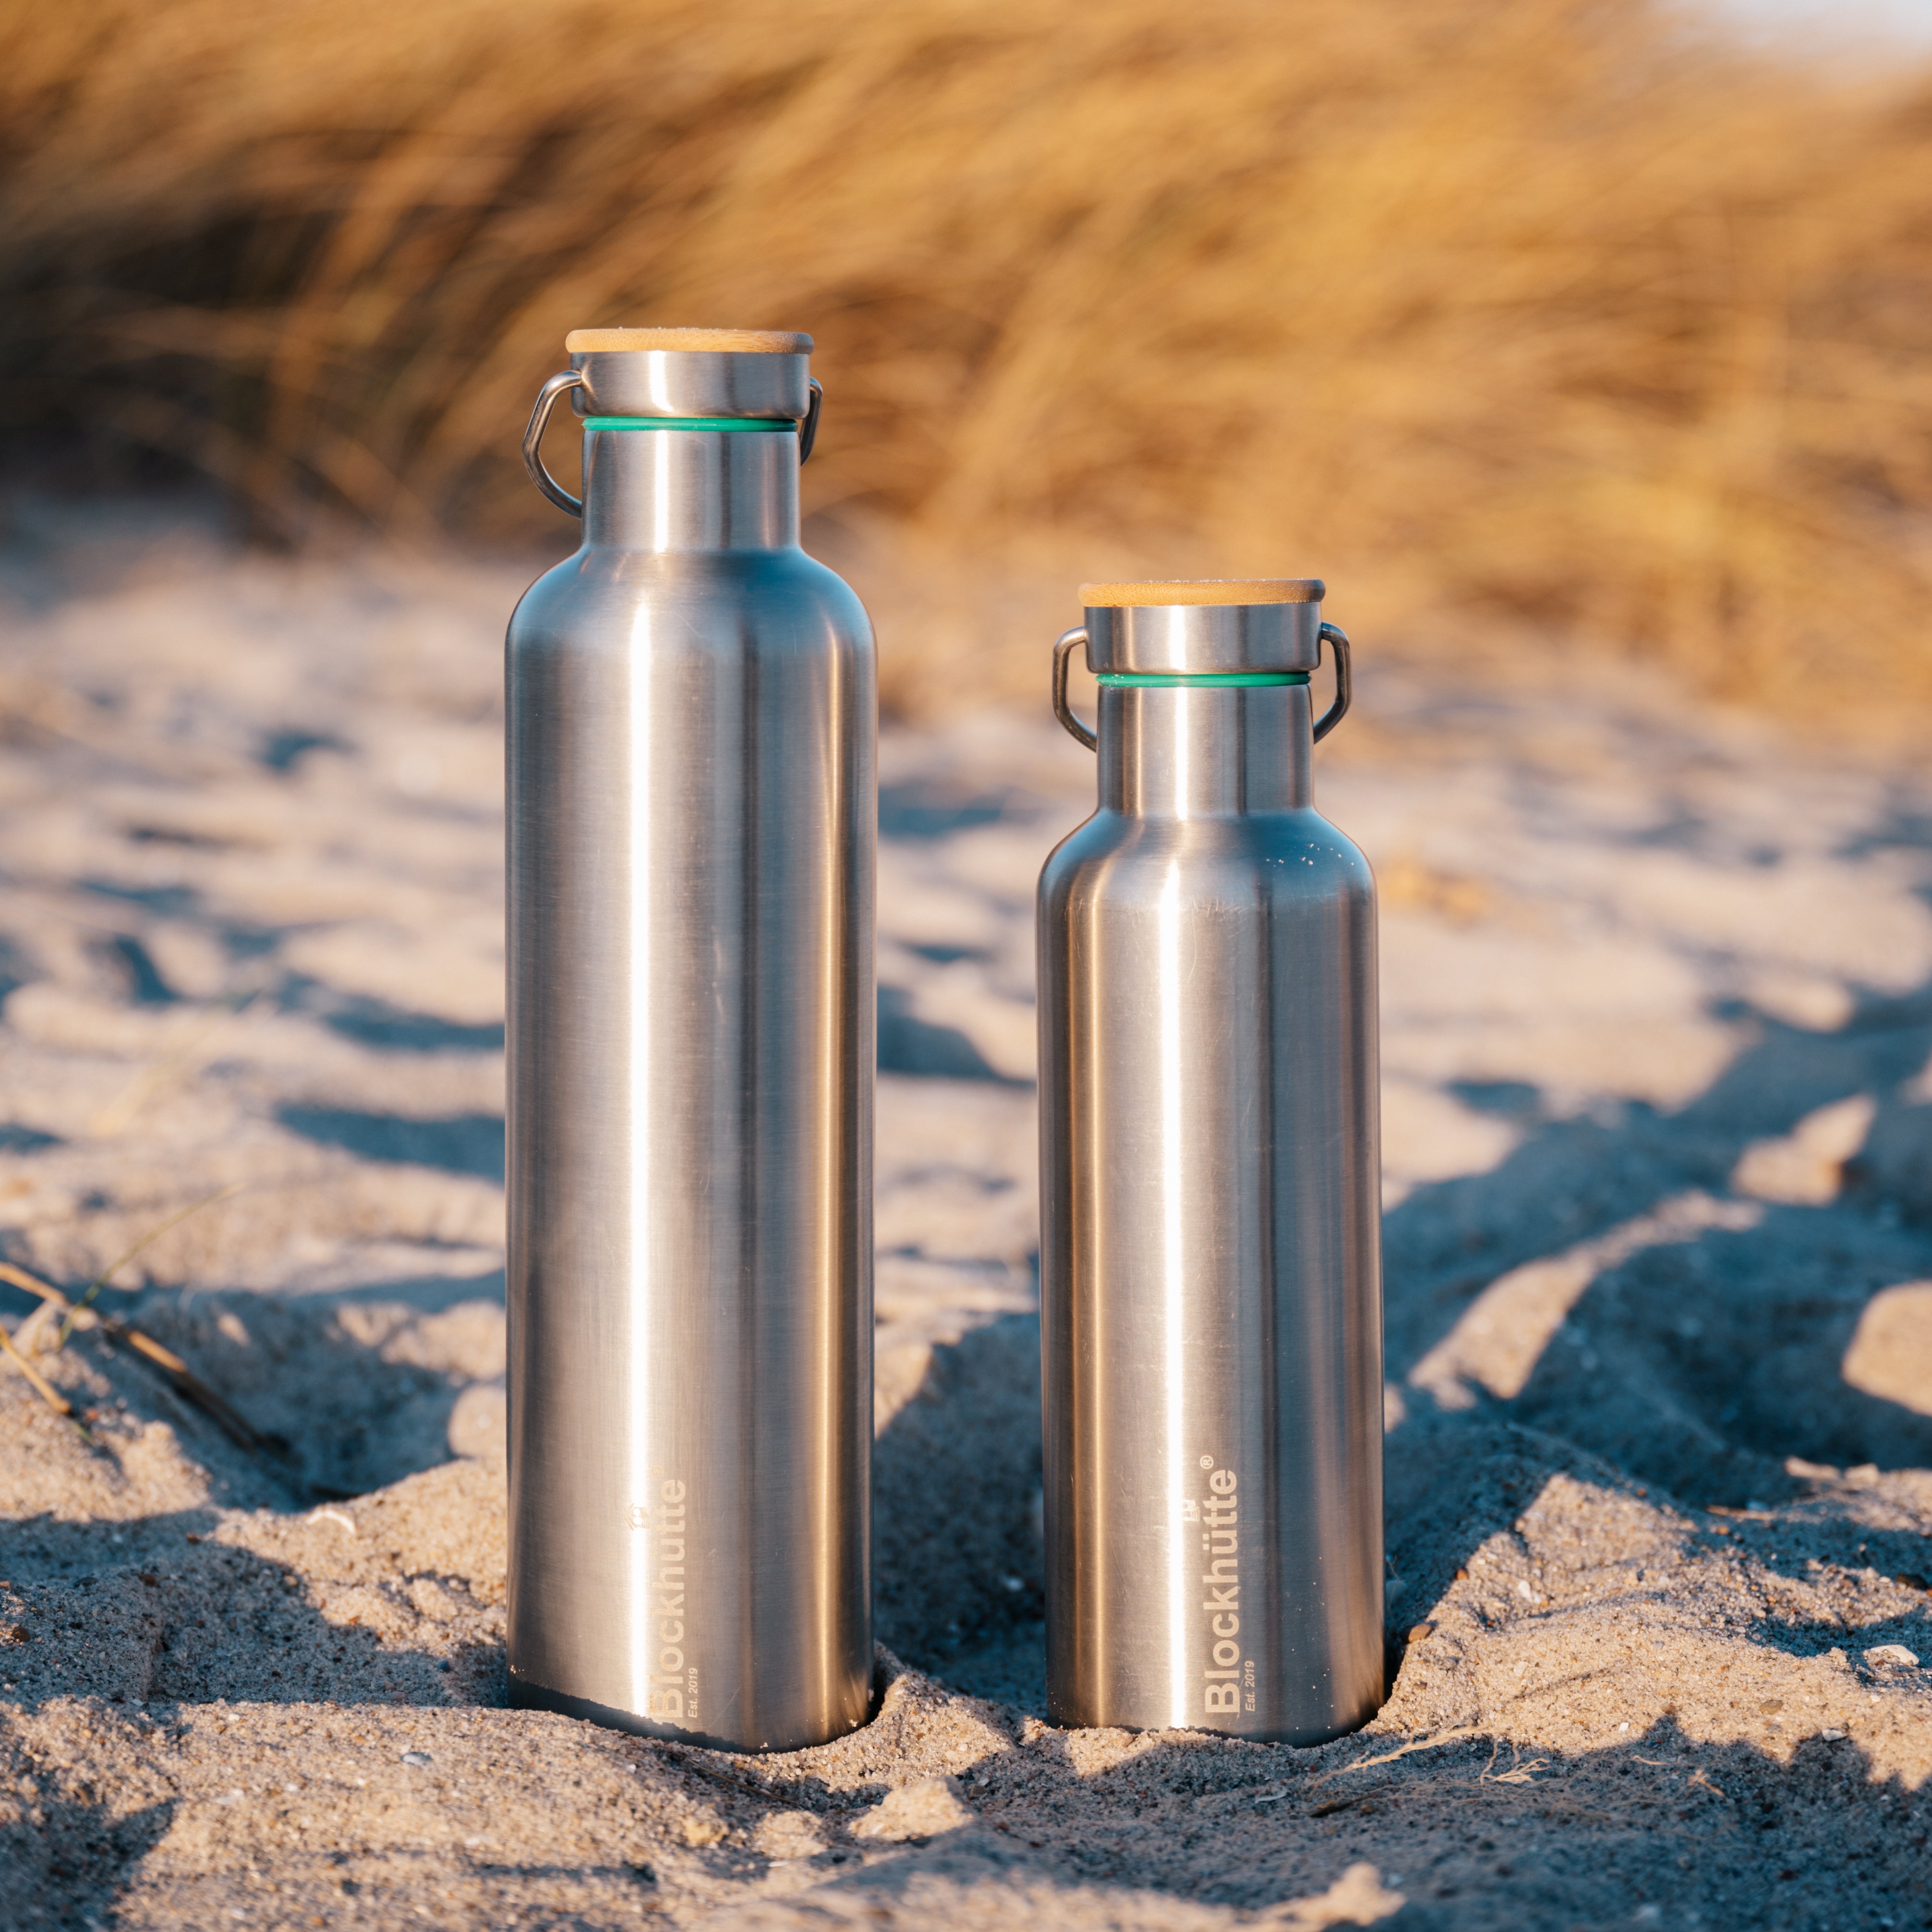 Blockhuette stainless steel water bottles in comparison onthe beach